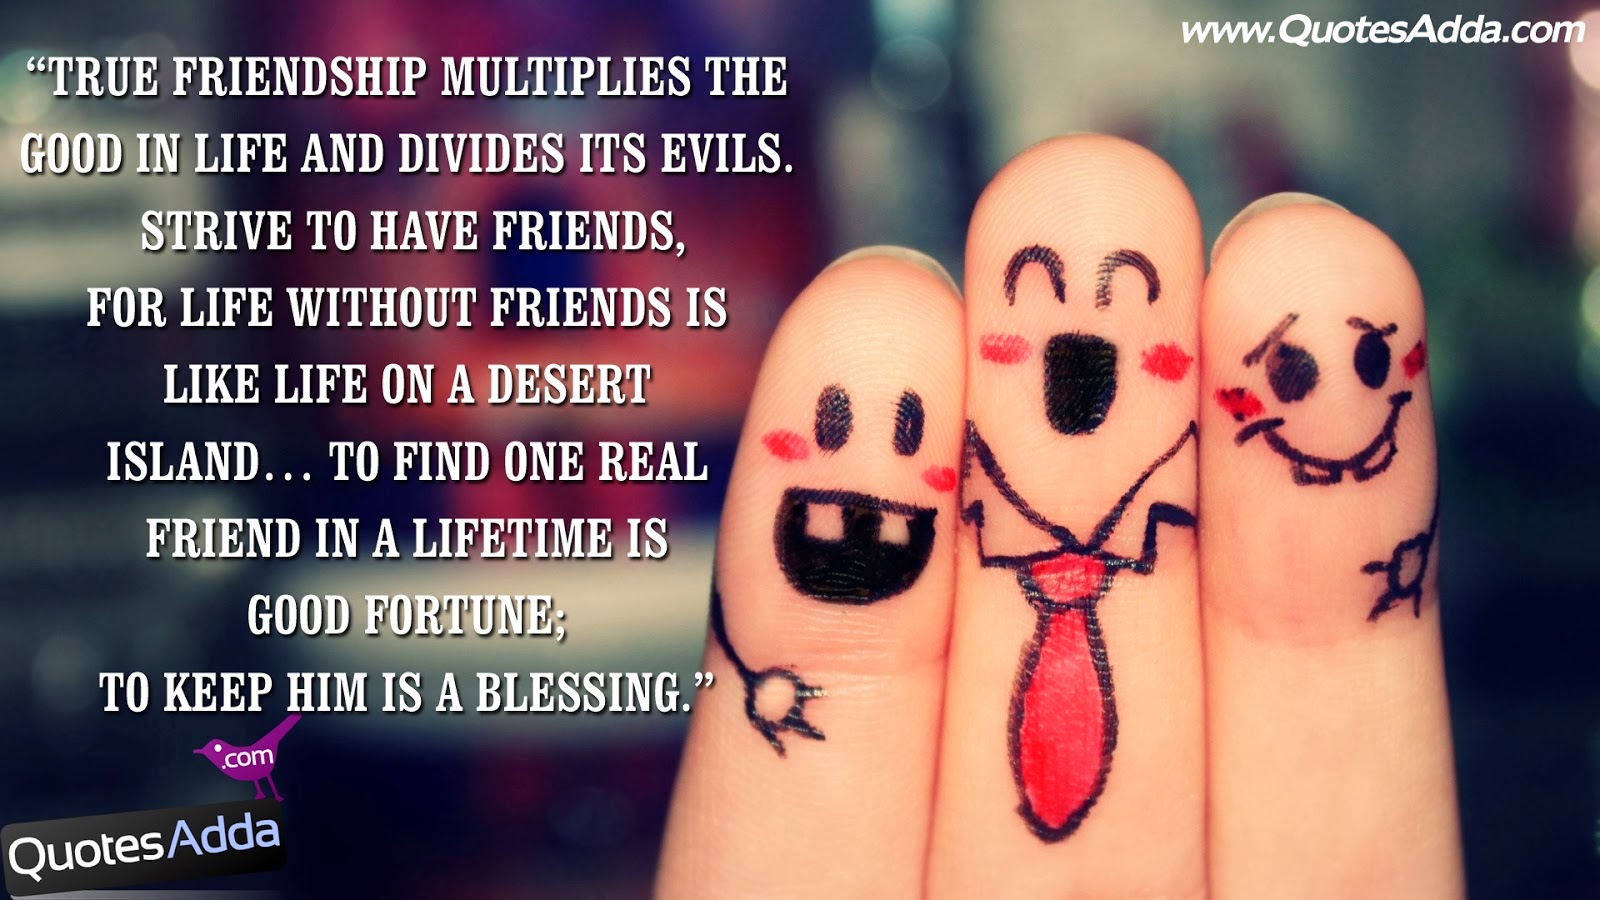 True friendship multiplies the good in life and Divides its evils Strive to have friends For life without friends is like a life on a desert island